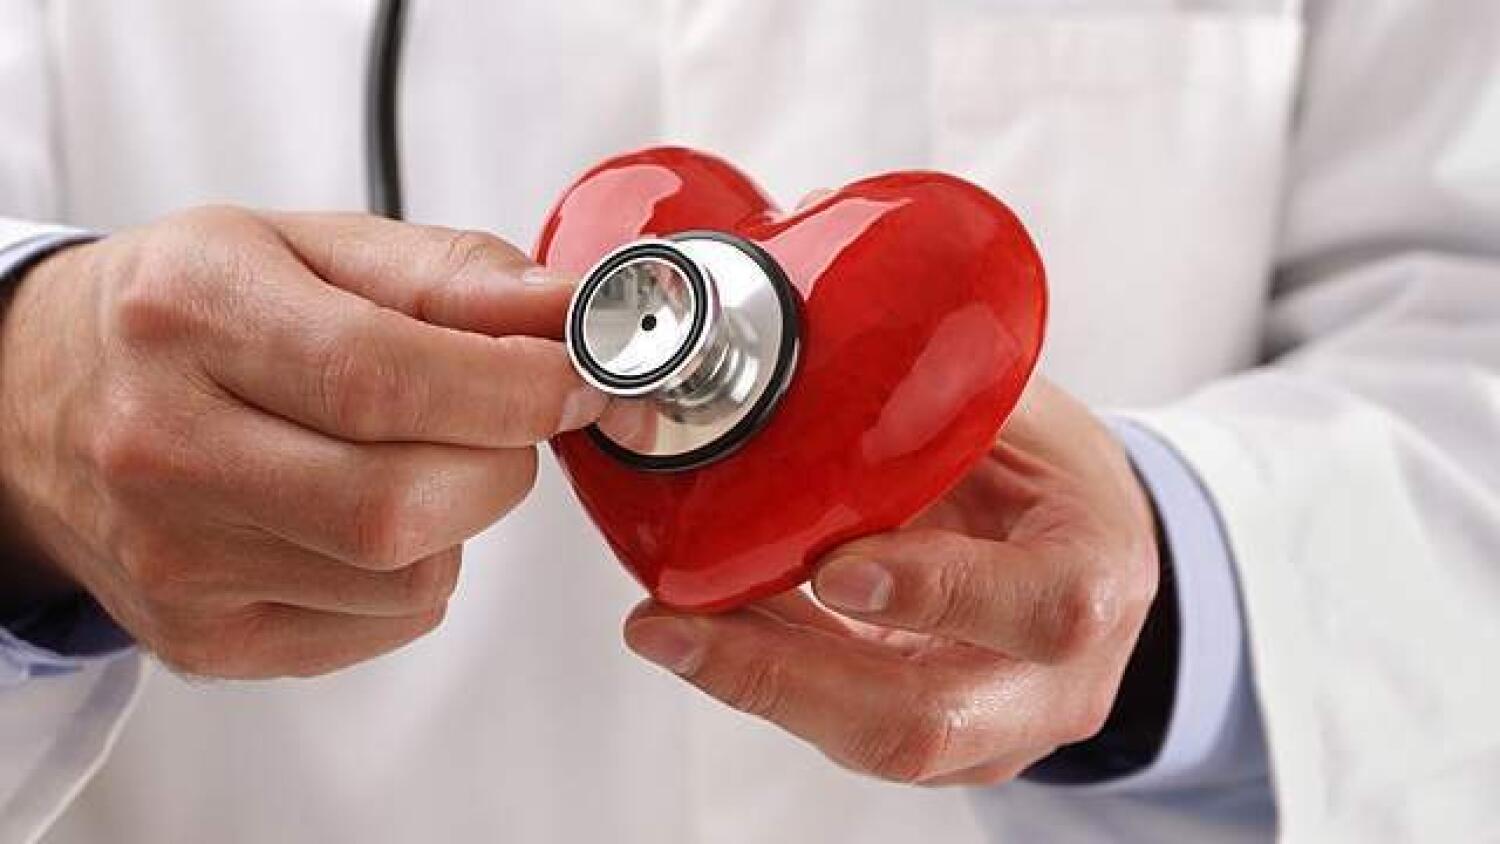 UAE: Why are more residents under 30 suffering heart attacks?